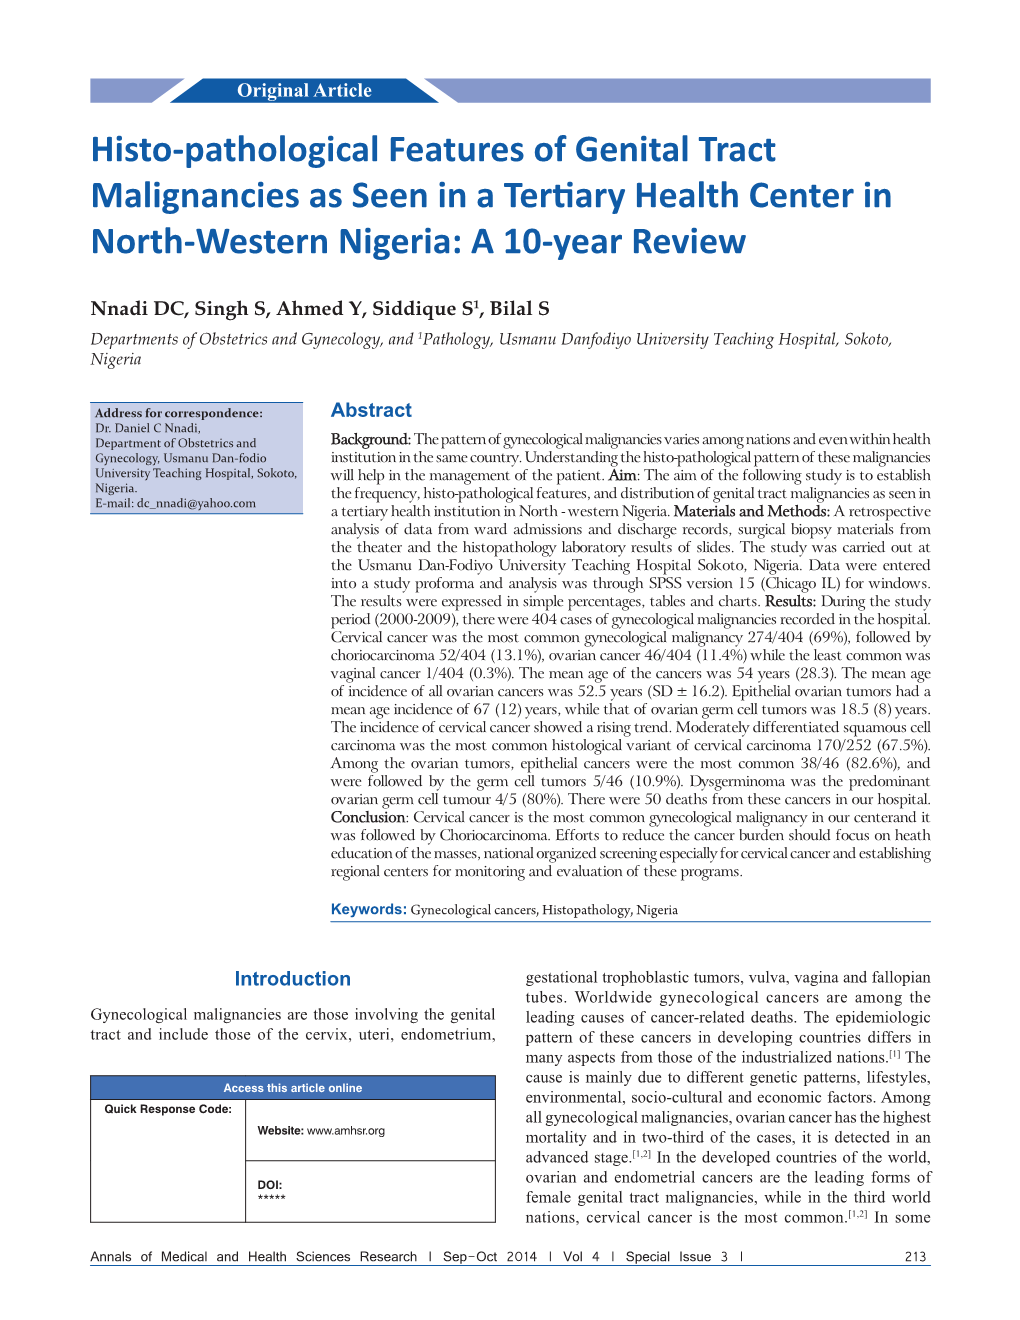 Histo‑Pathological Features of Genital Tract Malignancies As Seen in a Tertiary Health Center in North‑Western Nigeria: a 10‑Year Review